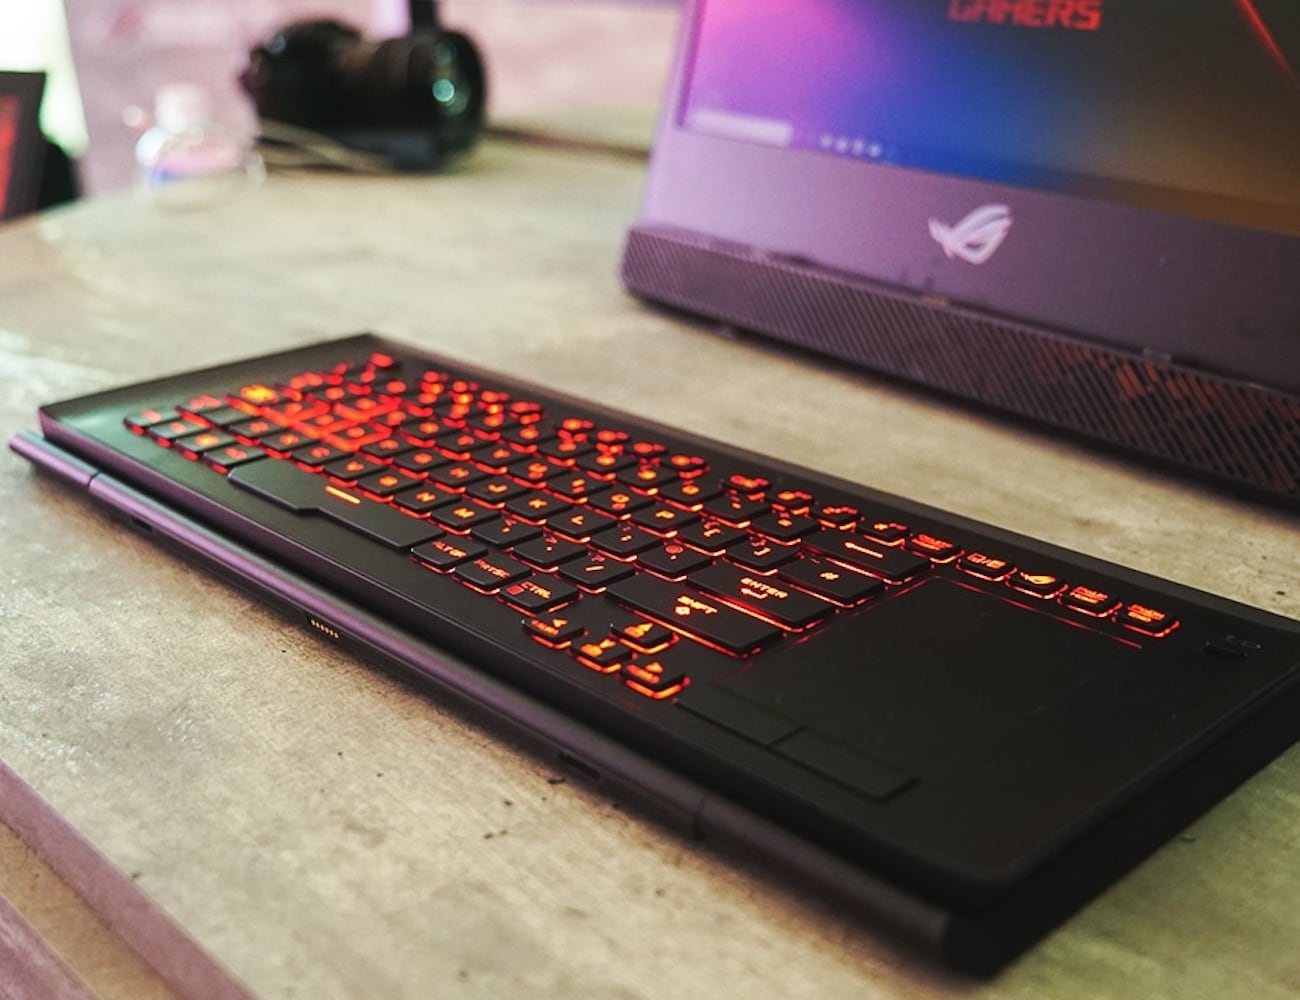 8 Gaming laptops worthy of taking you to the next level - Asus ROG Mothership 02